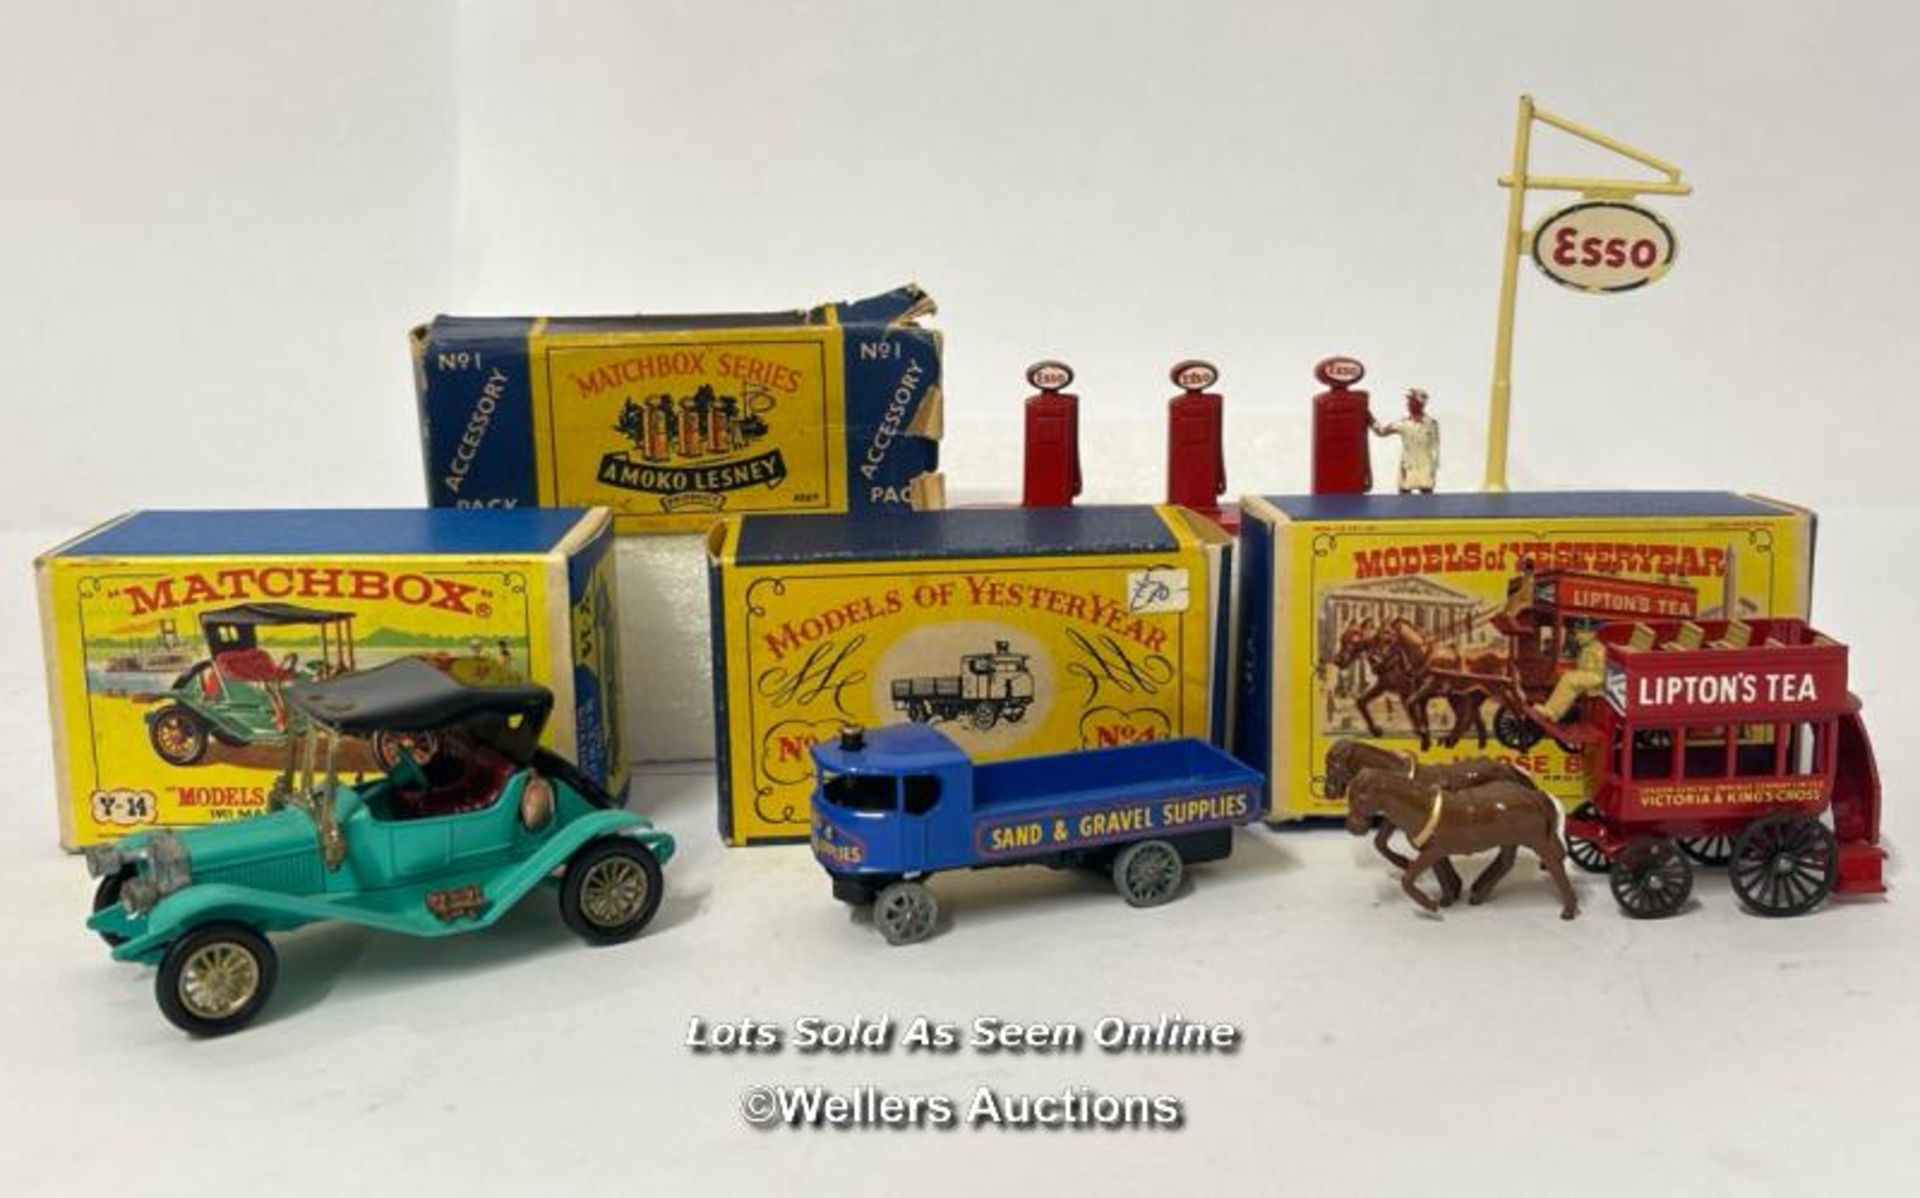 Vintage Matchbox Models of Yesteryear including Moko Lesney accessory pack no.1 Esso gas pumps and